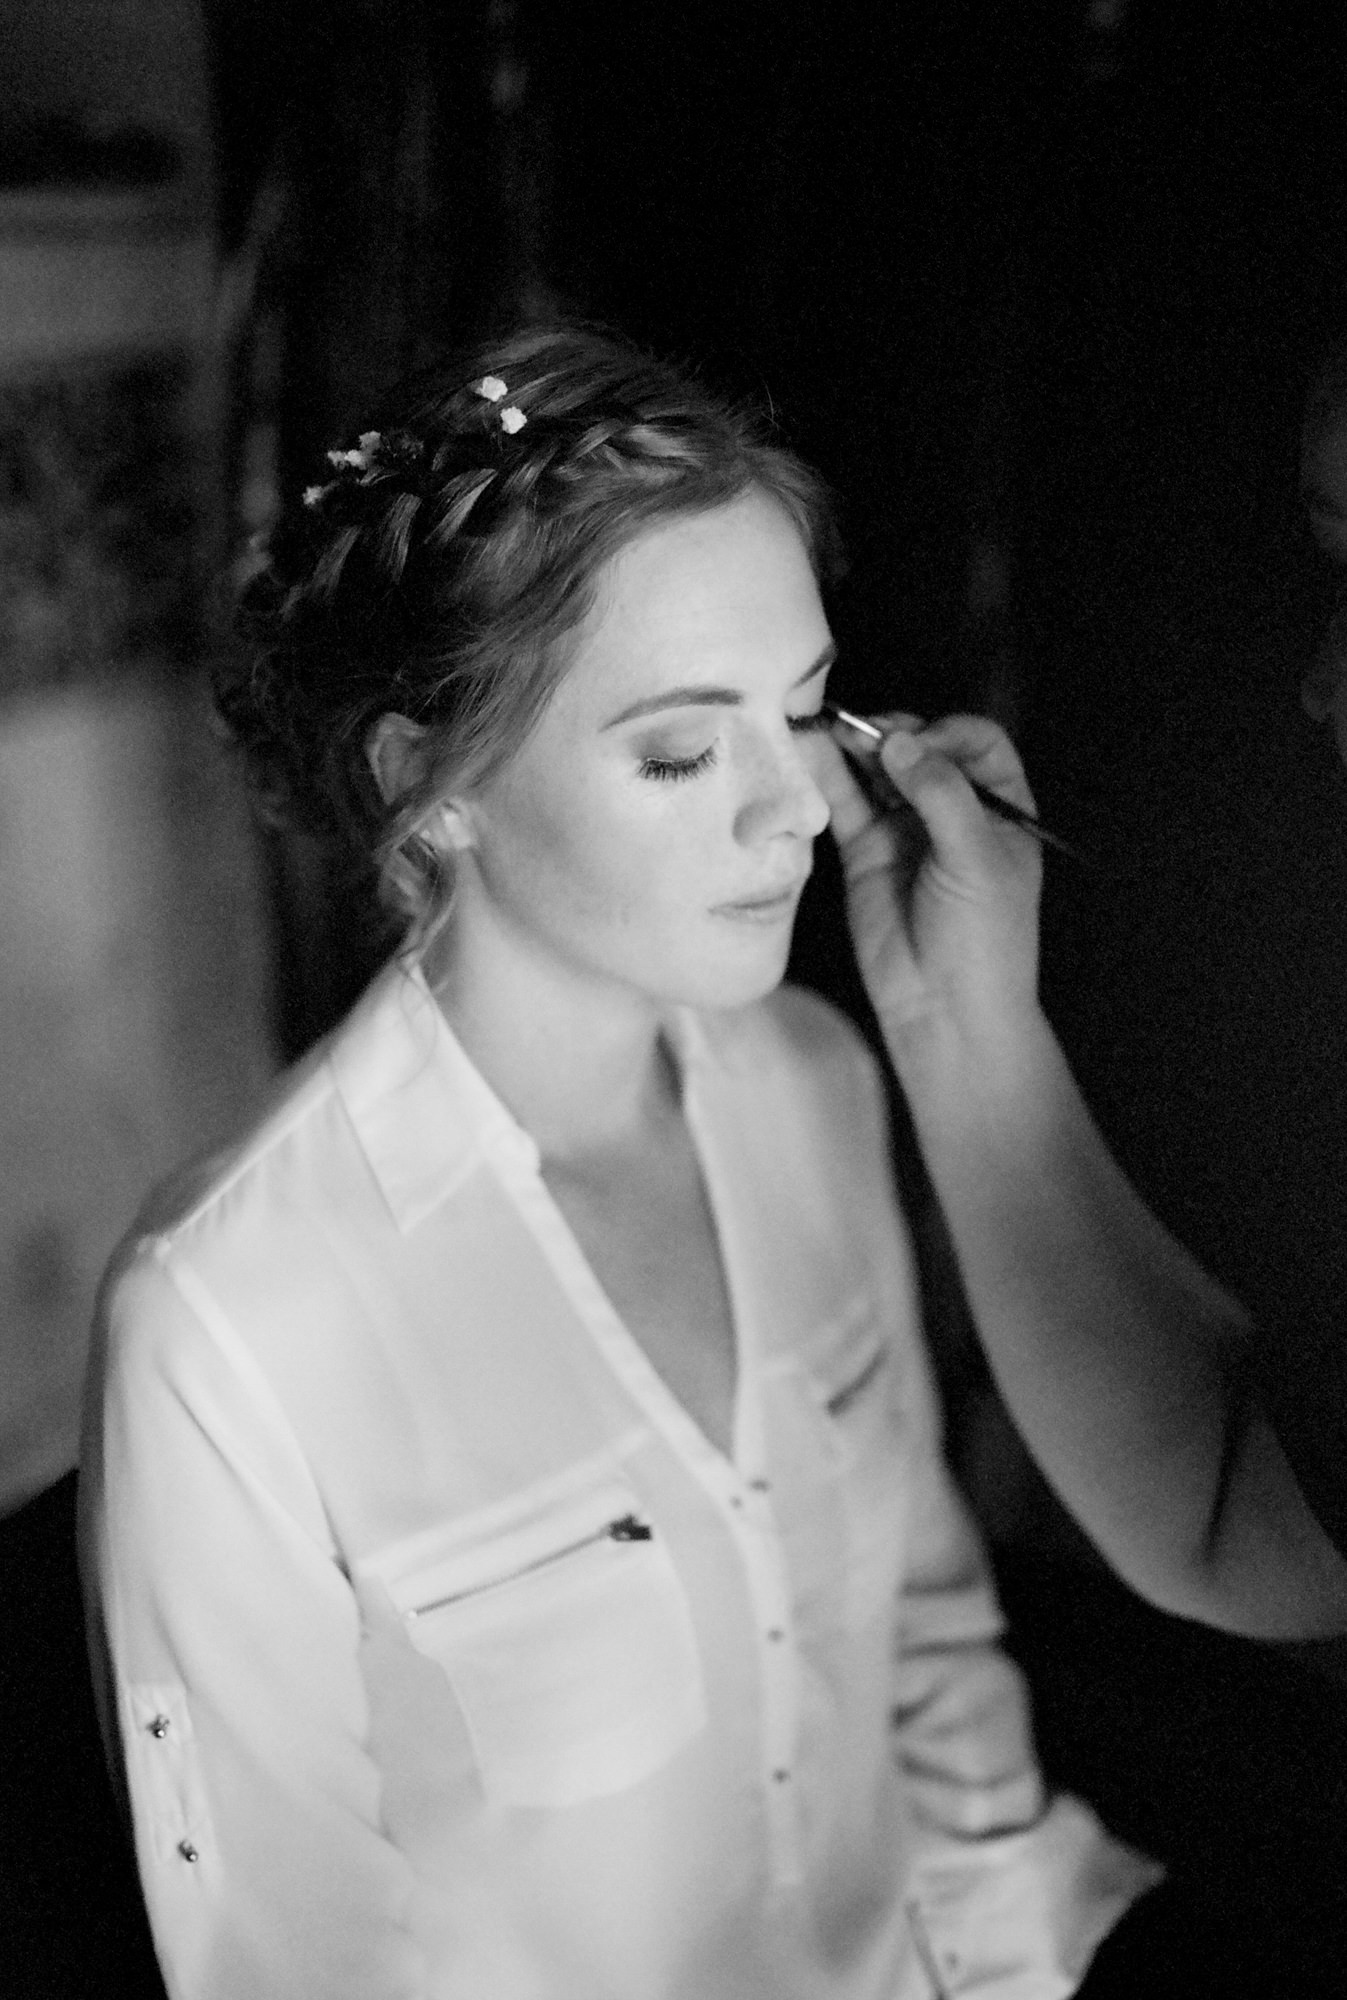 Katherine getting ready for her wedding at Kingston House, WA. September 2016.